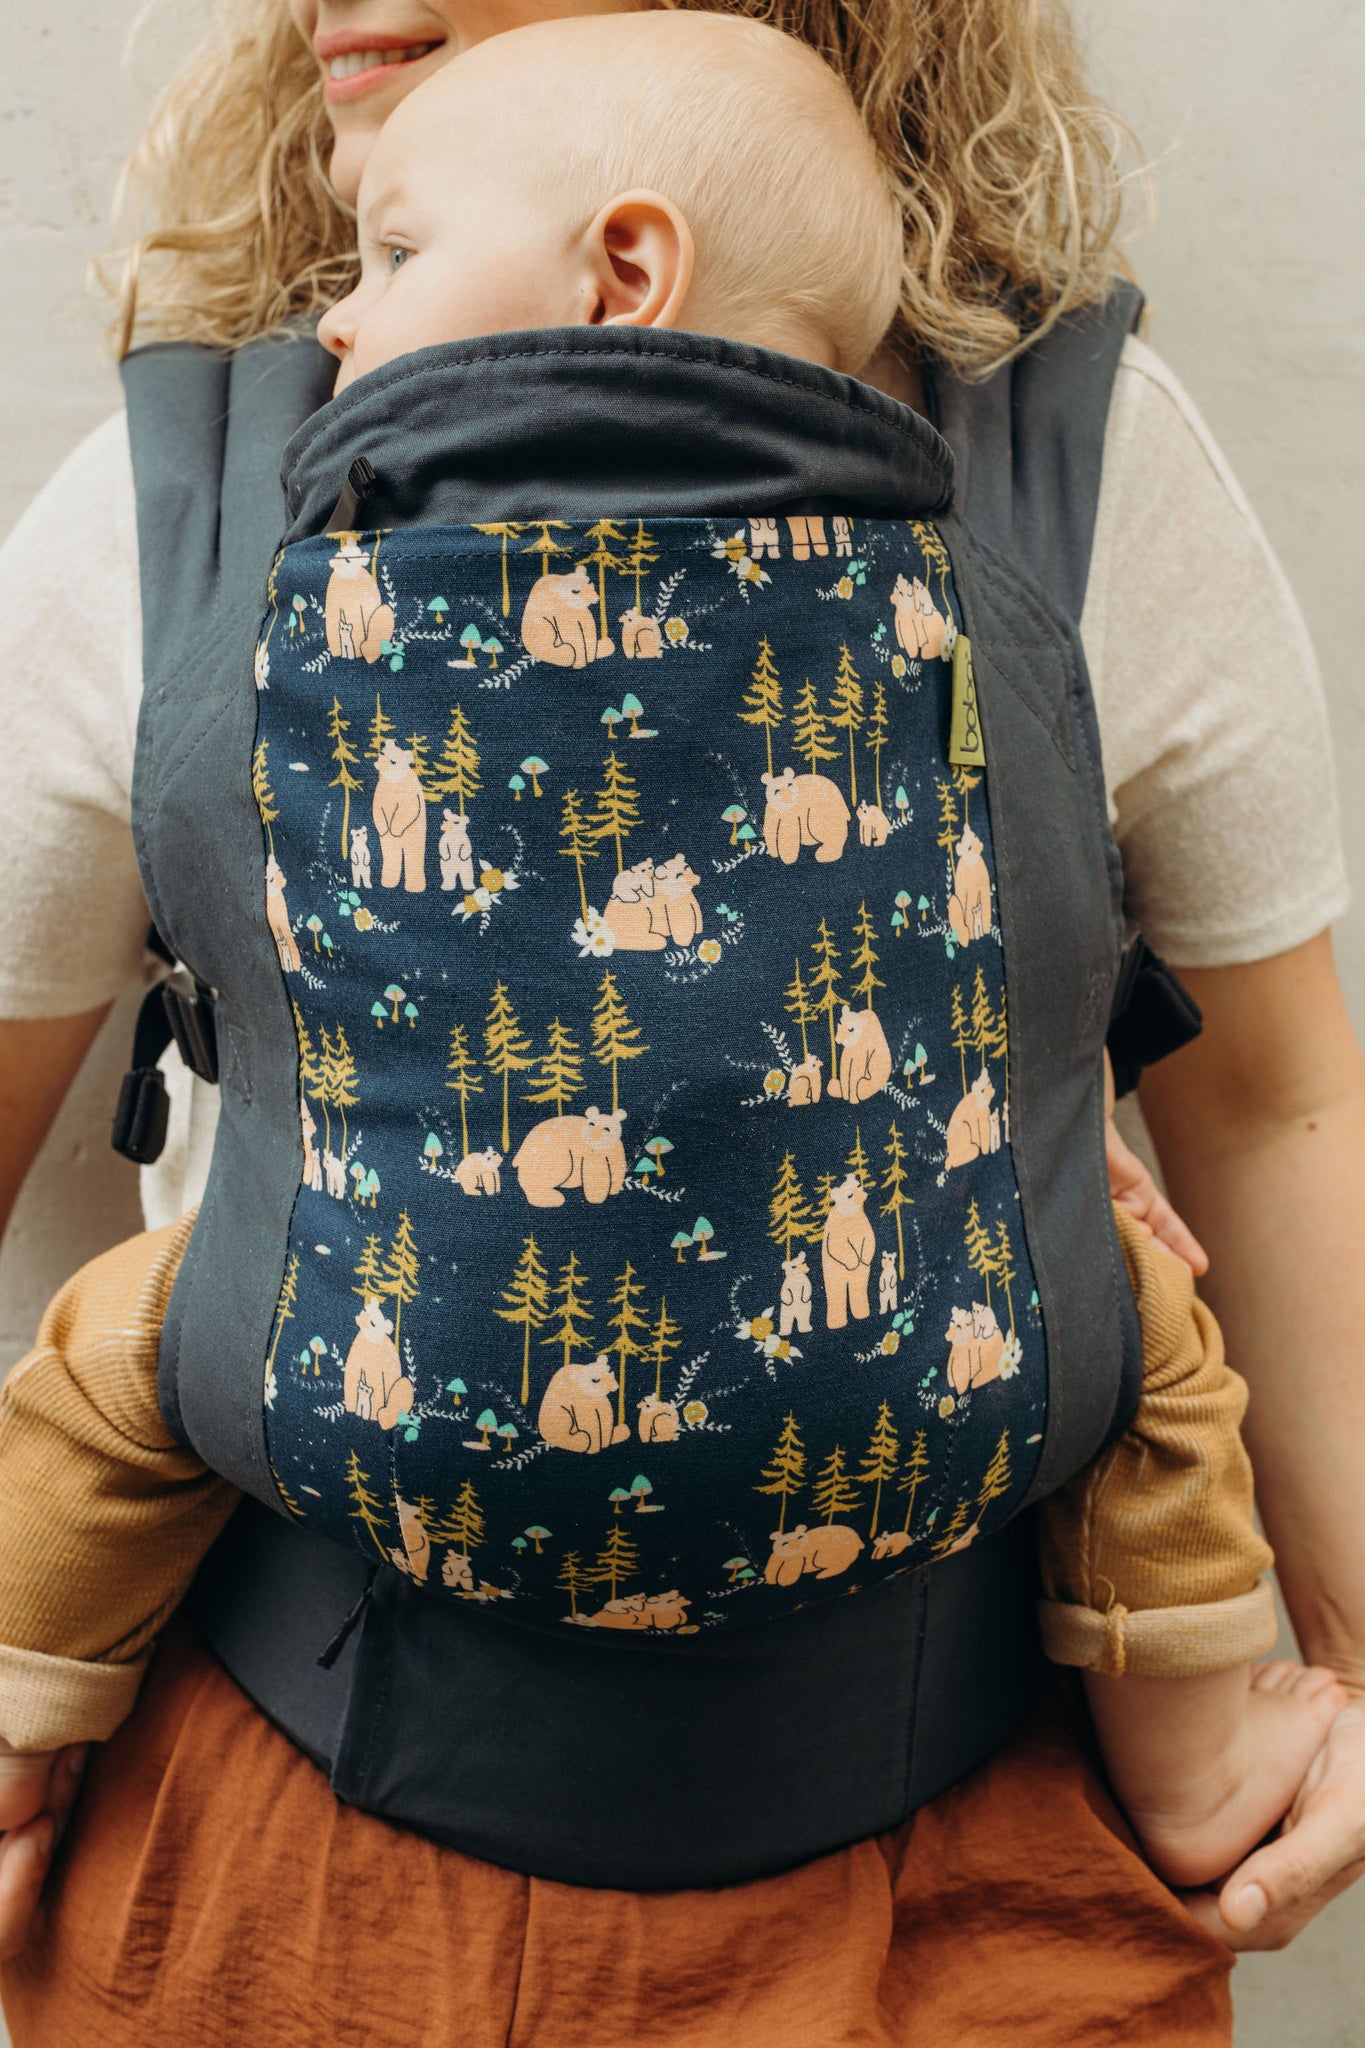 Boba Classic Carrier Baby Carrier Bear Cub